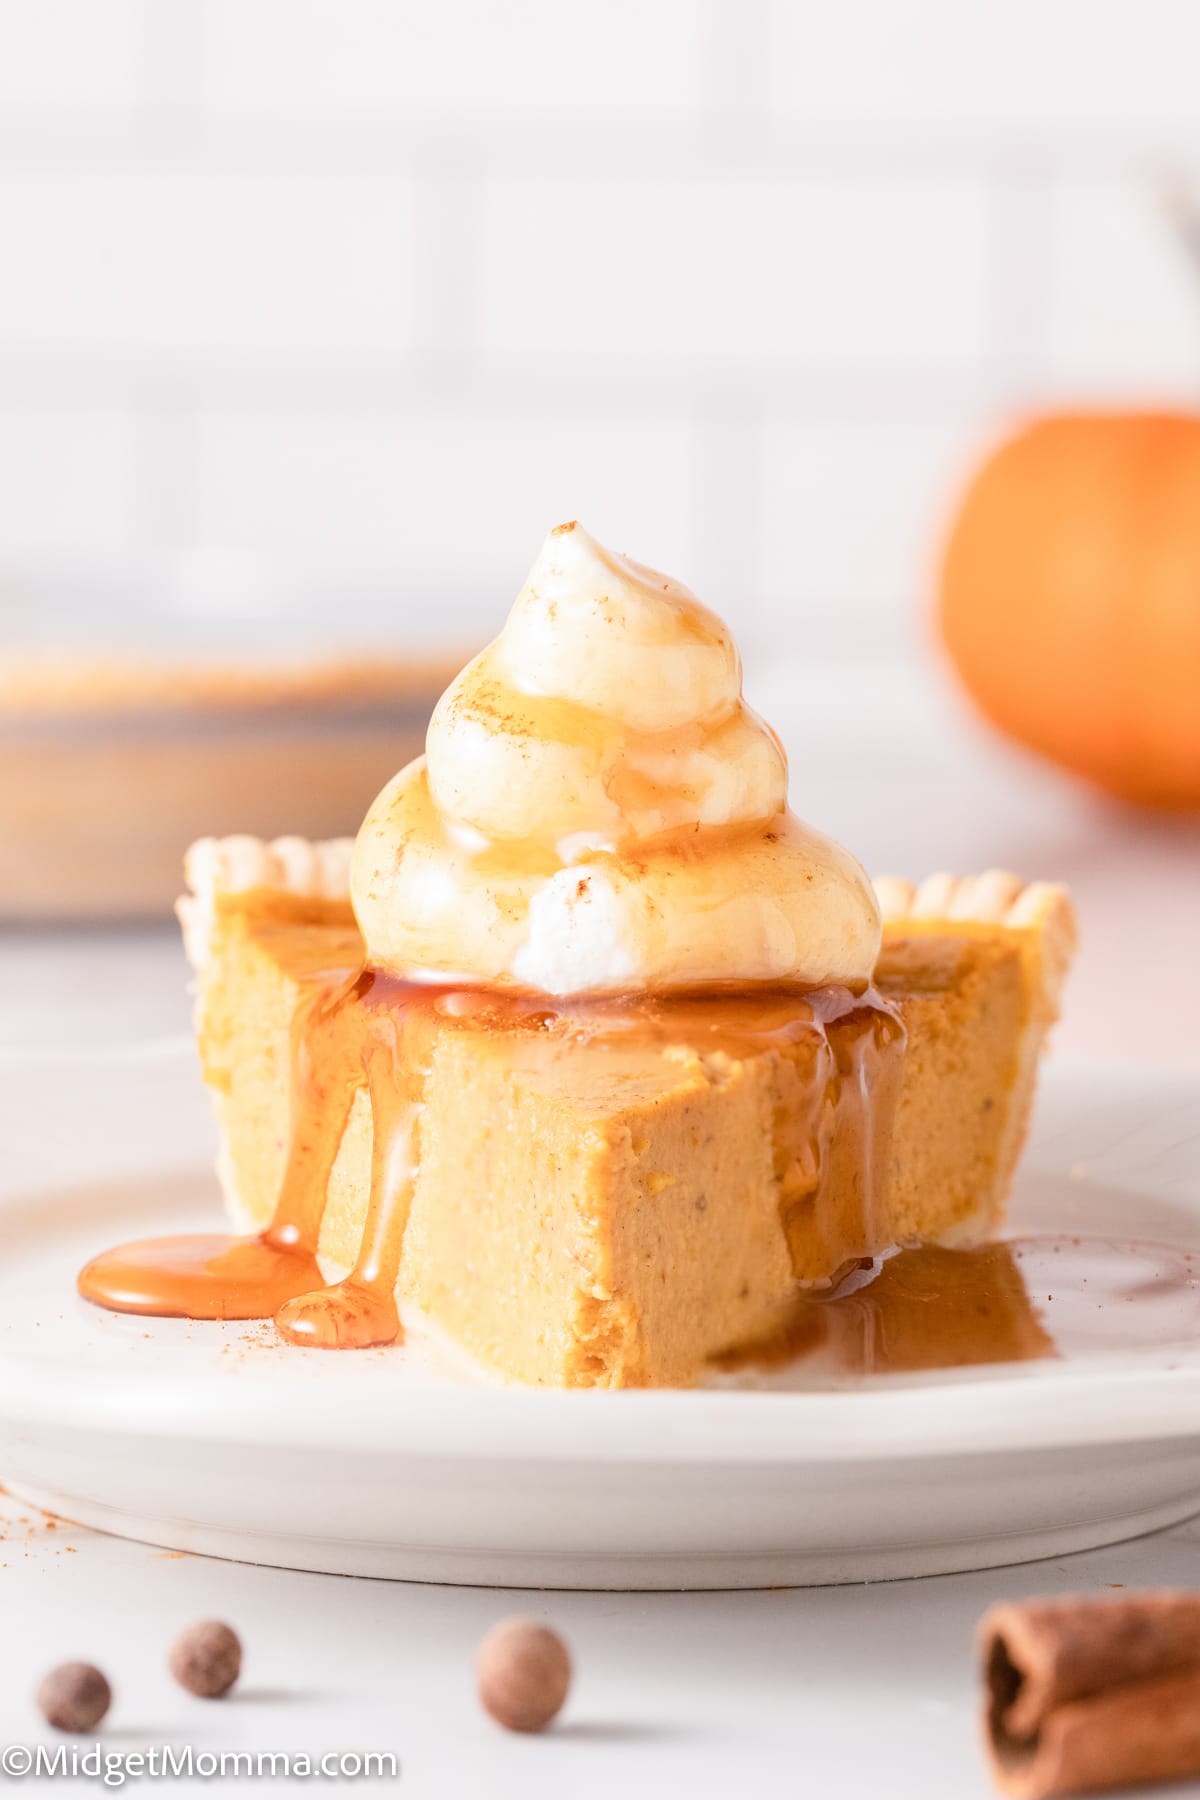 Slice of Maple Pumpkin Pie on a plate drizzled with maple syrup and topped with whipped cream